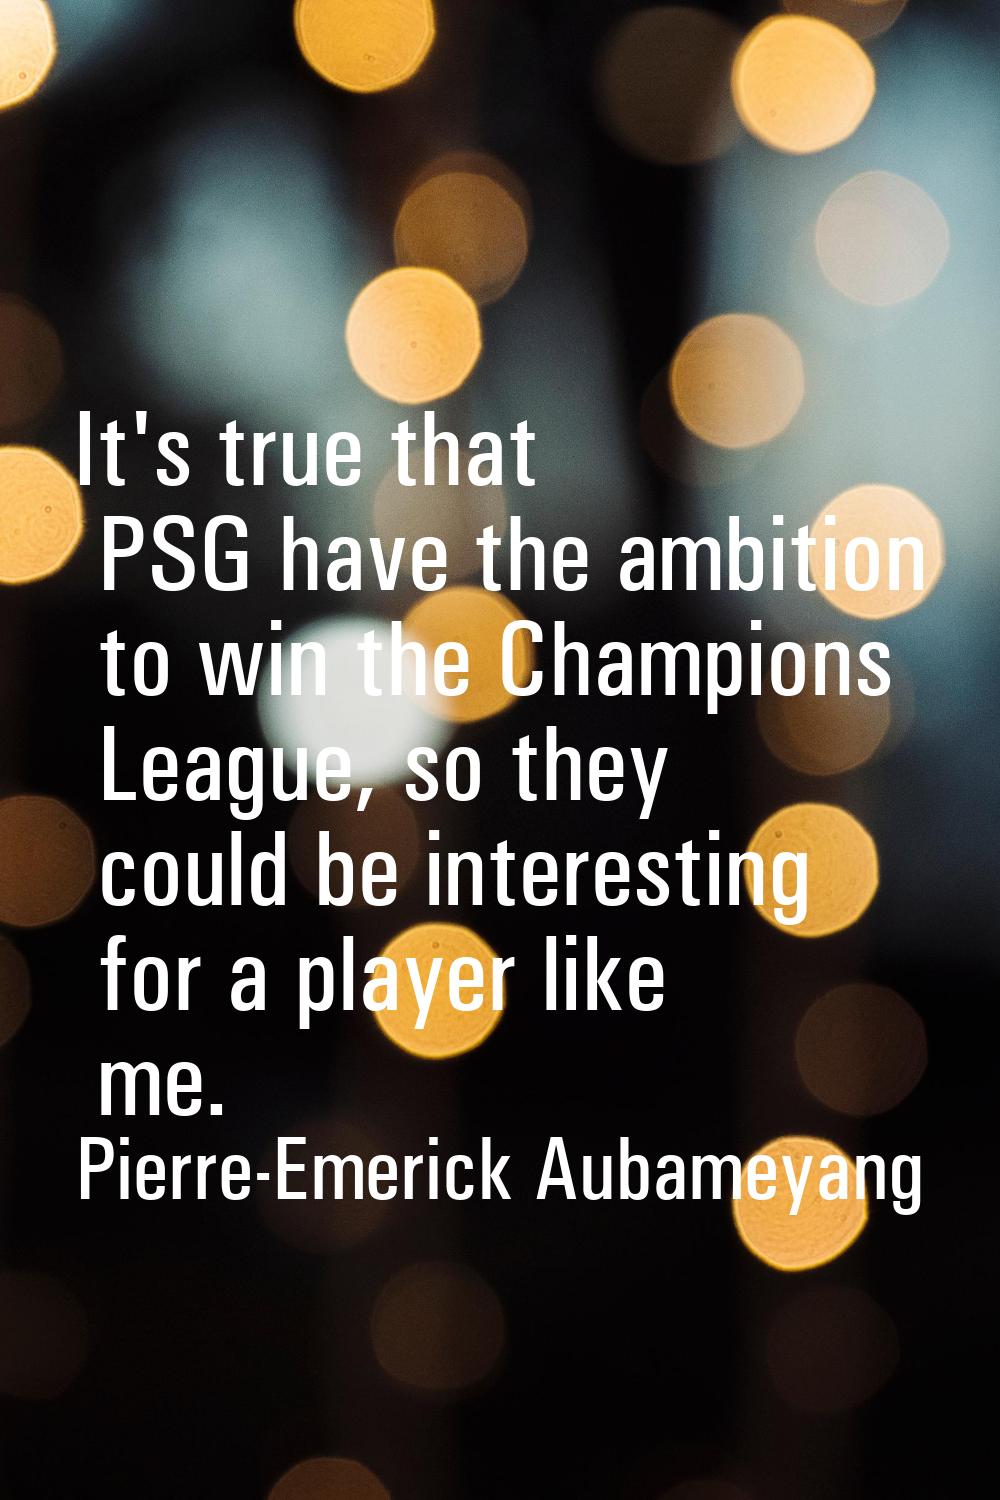 It's true that PSG have the ambition to win the Champions League, so they could be interesting for 